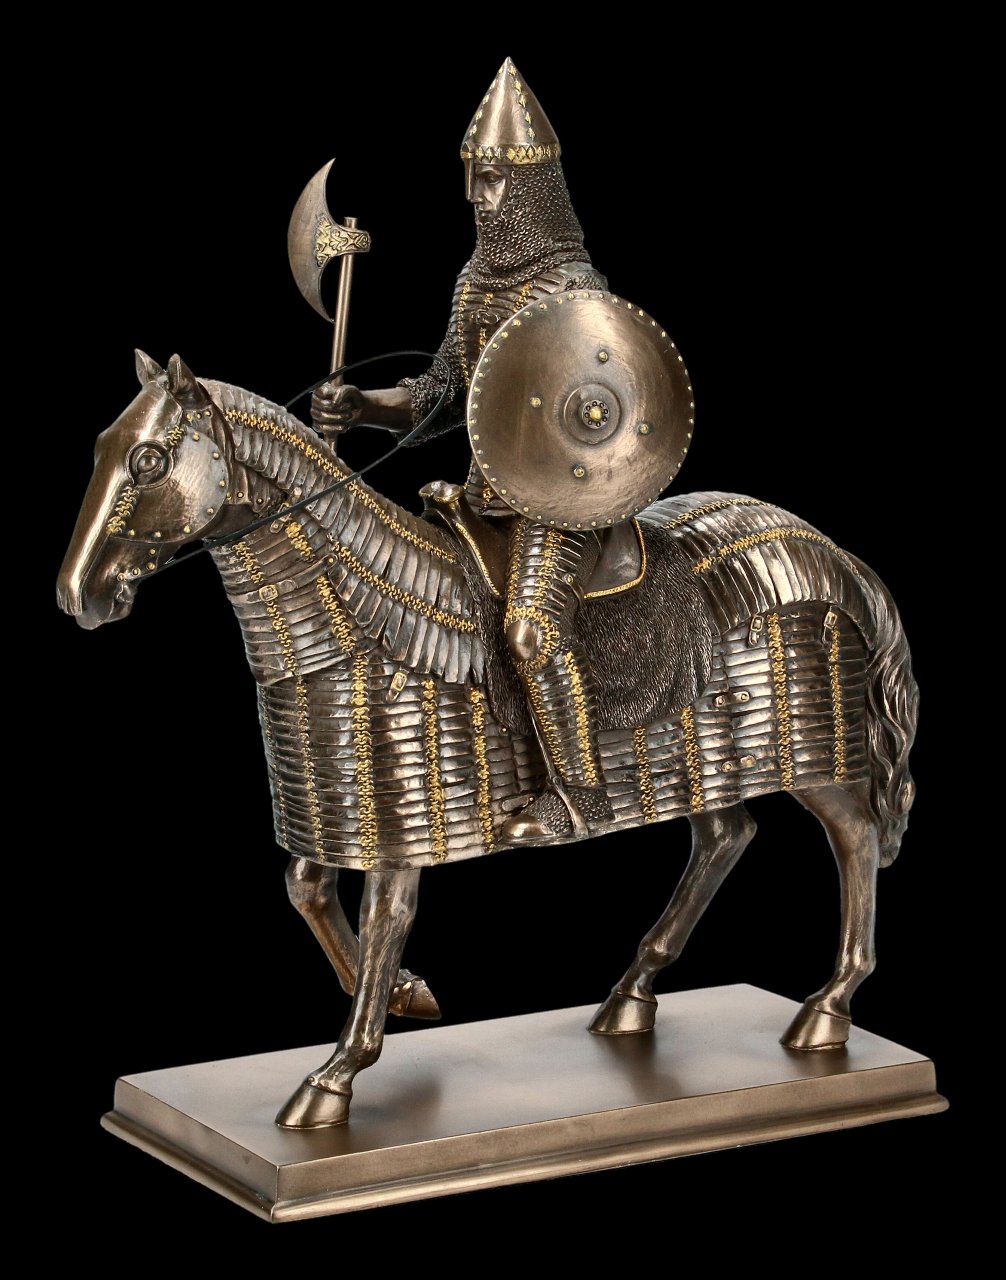 Late Middle Ages Knight Figurine on Horse